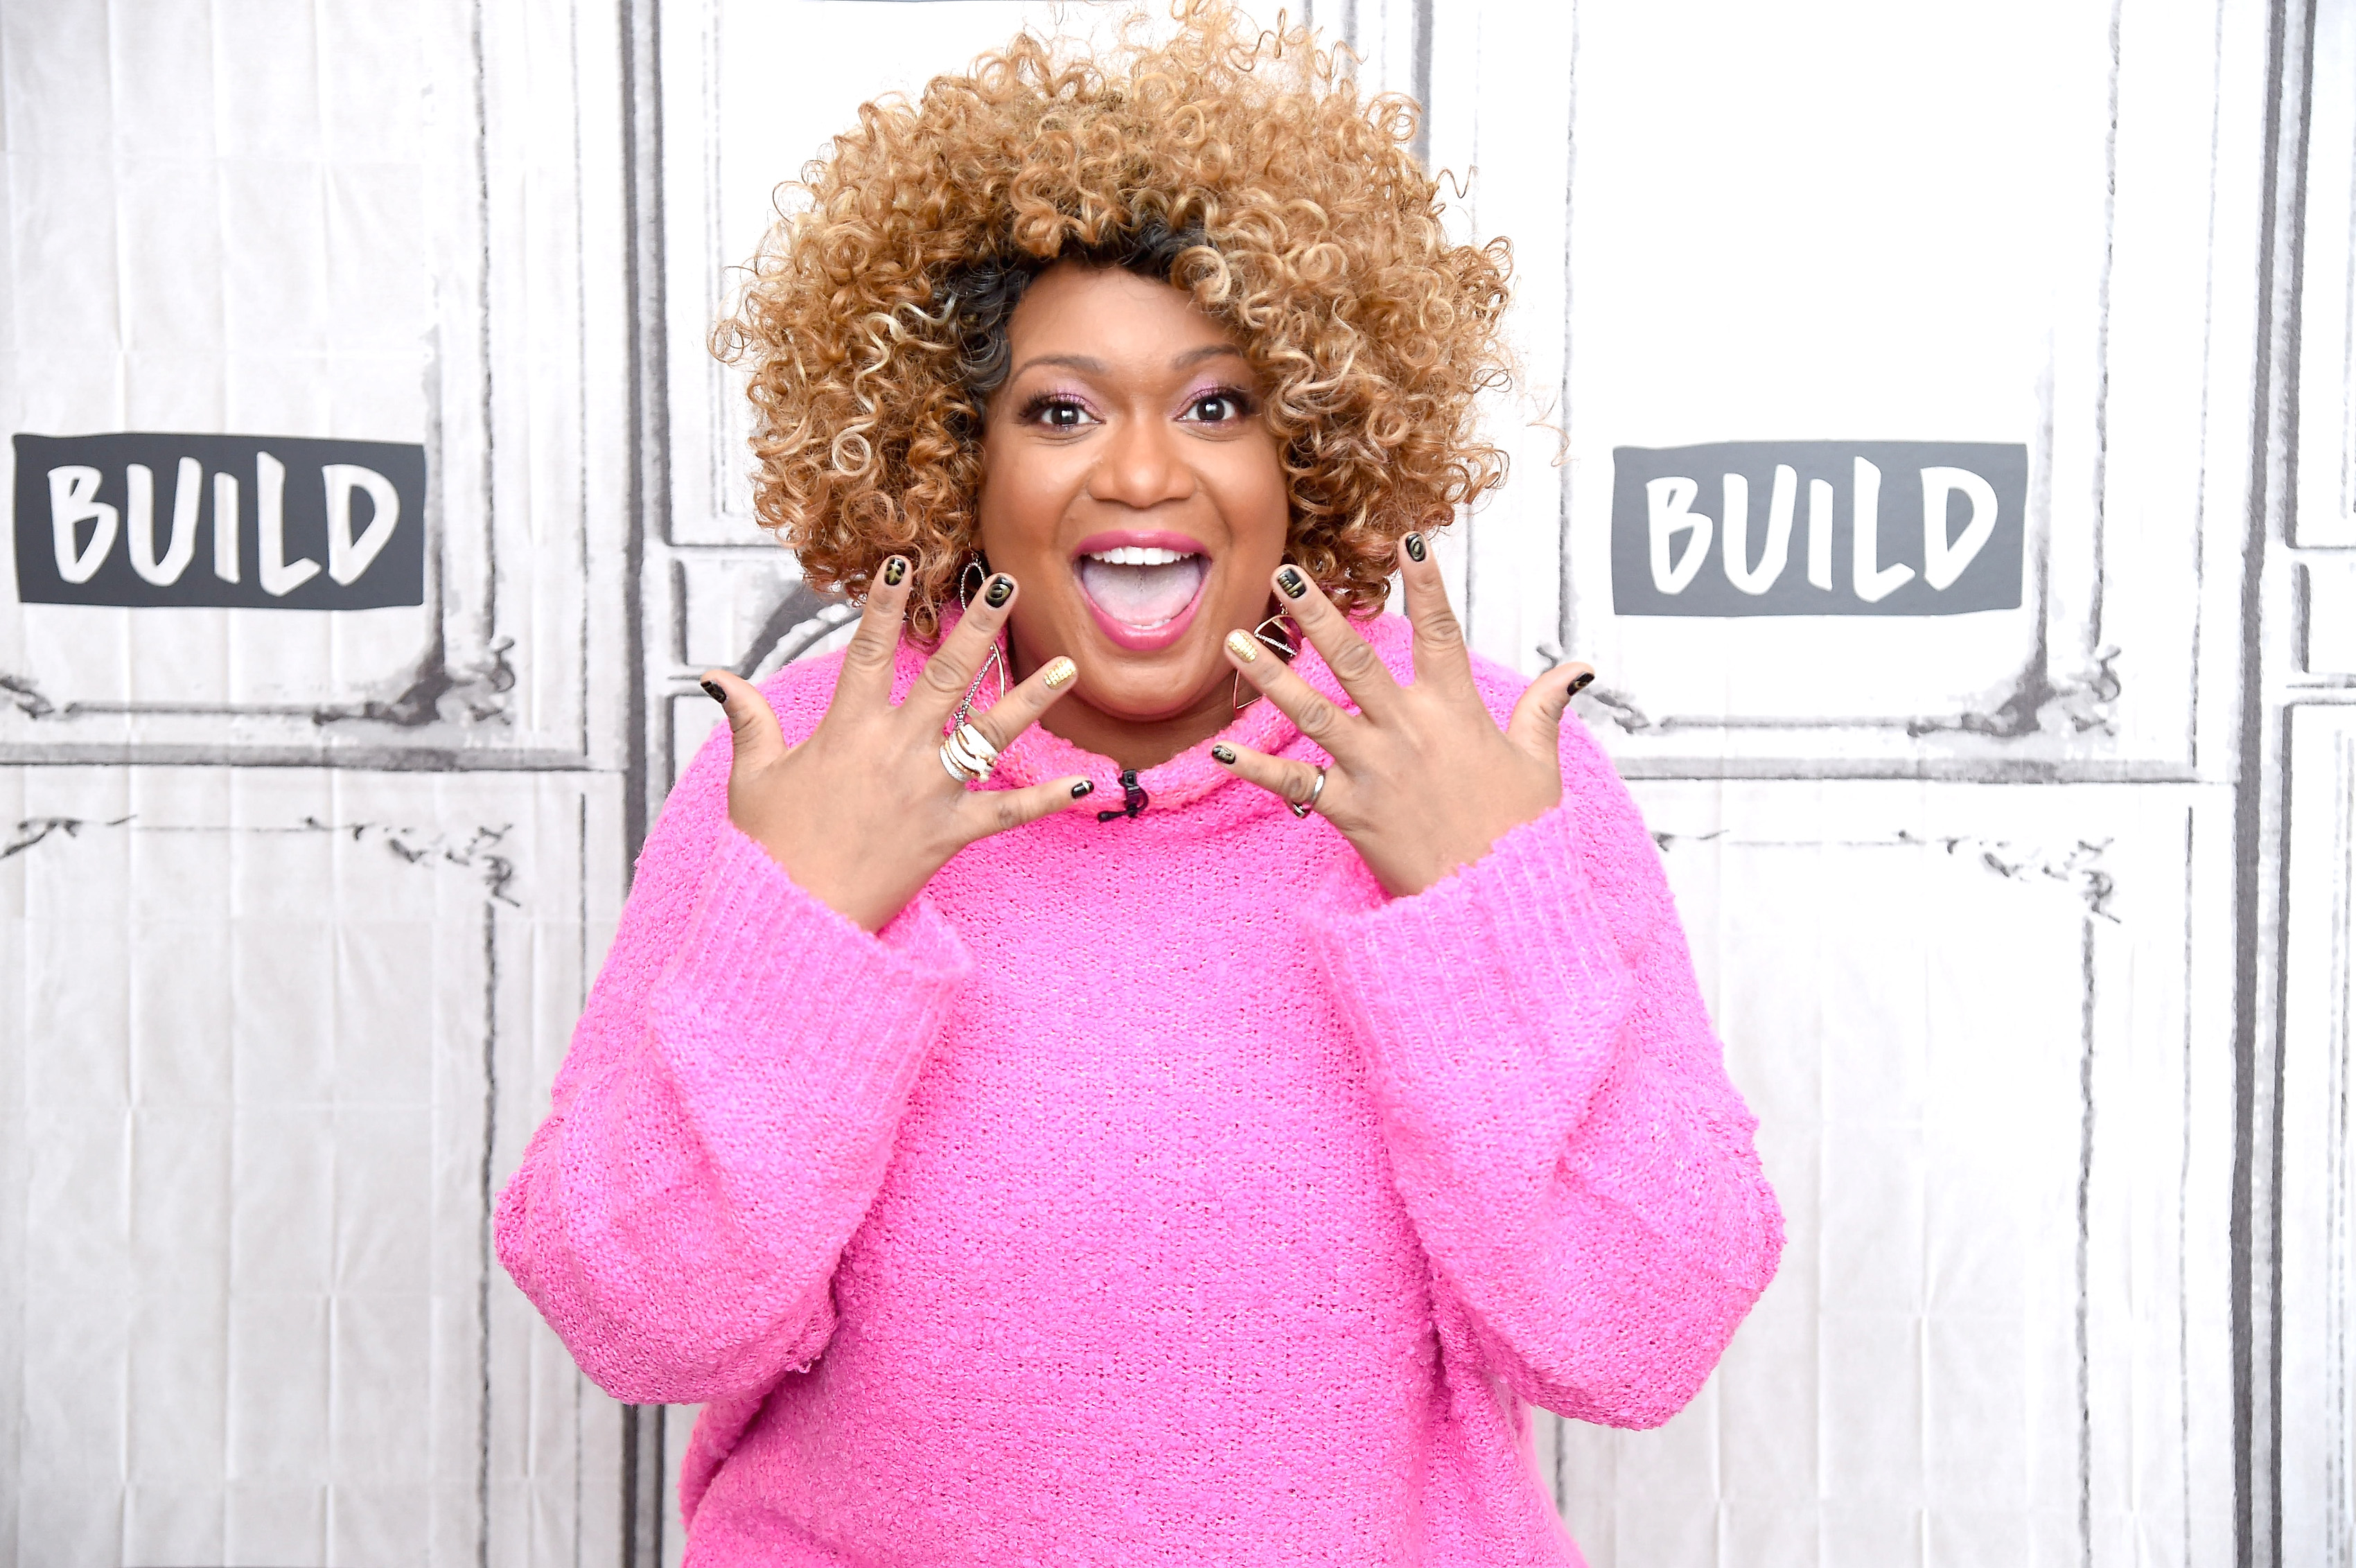 Food Network personality Sunny Anderson